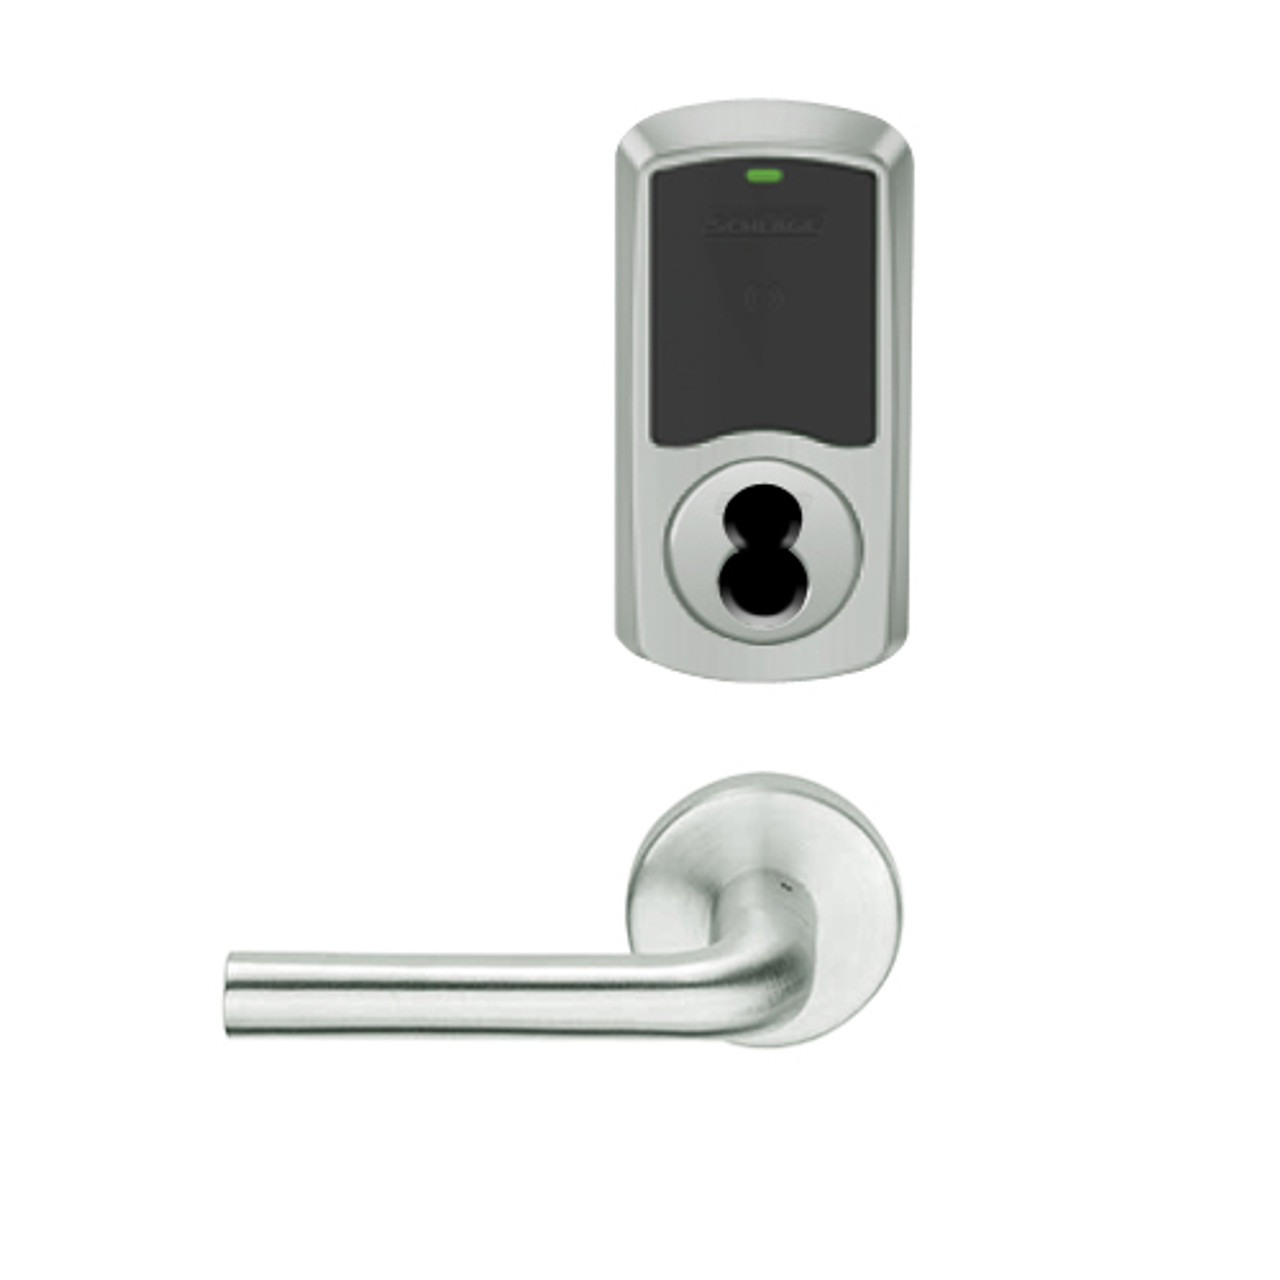 LEMD-GRW-J-02-619-00B Schlage Privacy/Apartment Wireless Greenwich Mortise Deadbolt Lock with LED and 02 Lever Prepped for FSIC in Satin Nickel